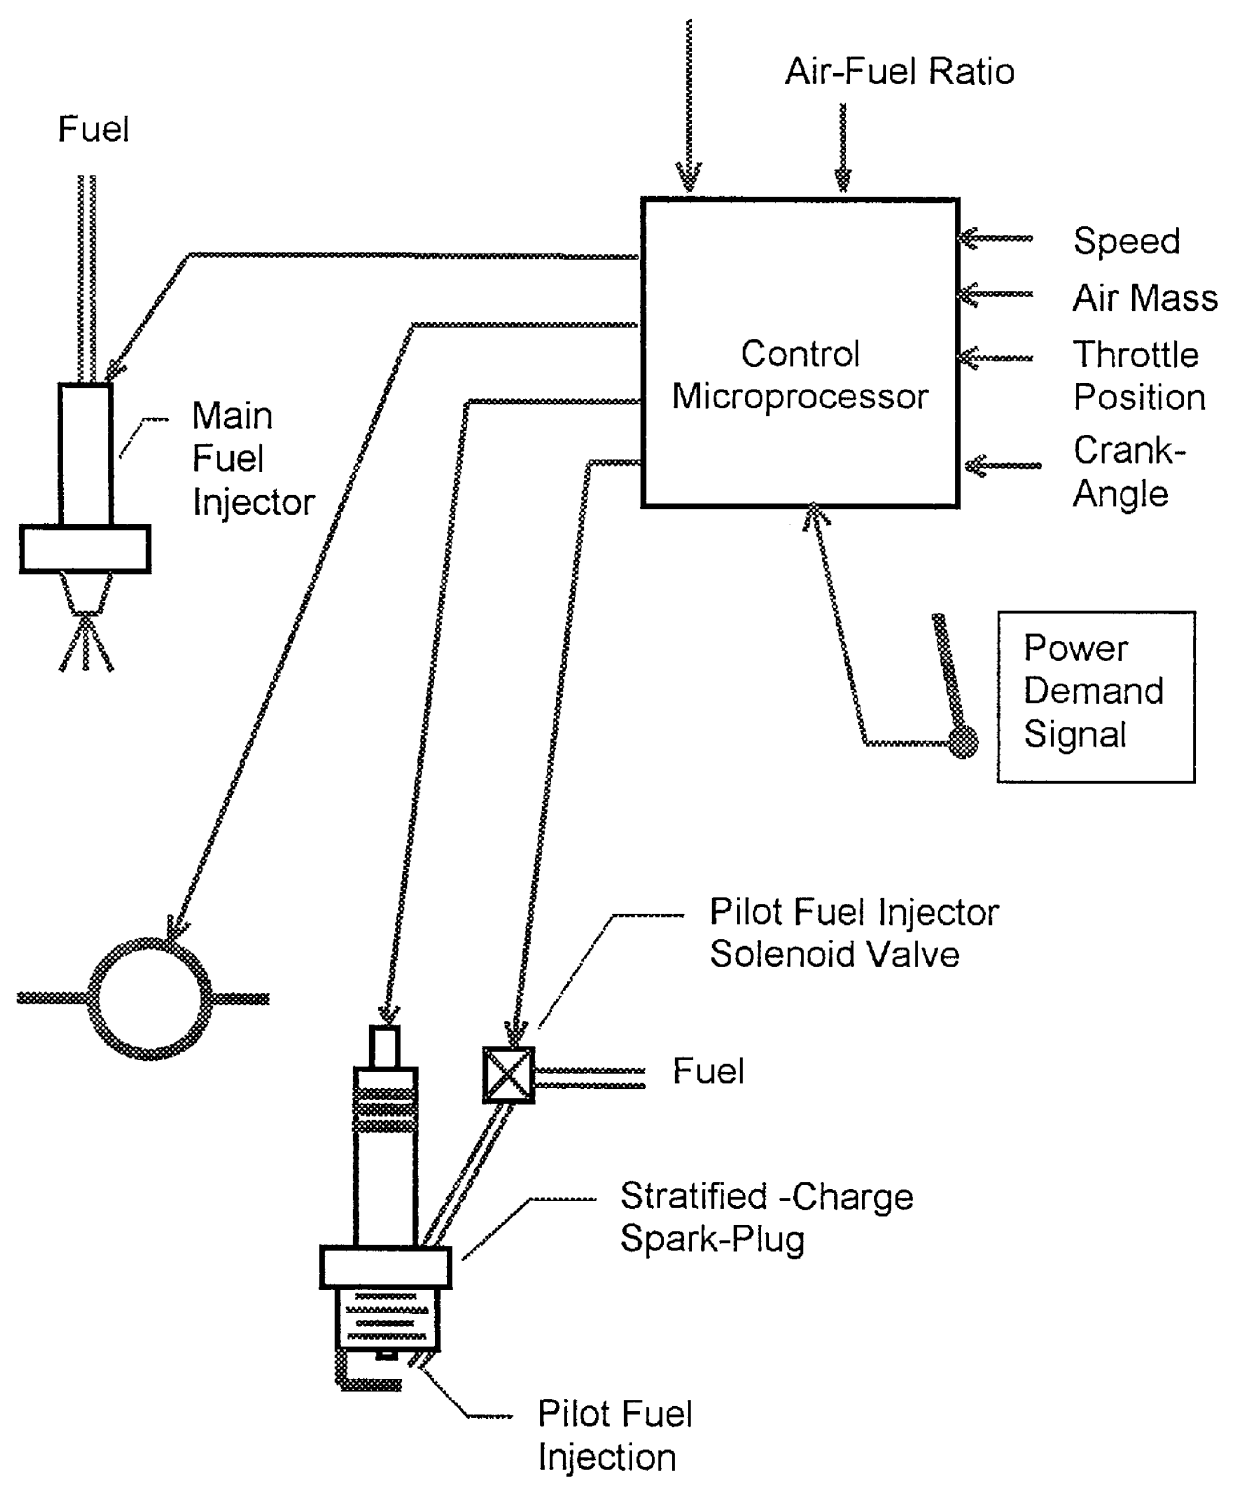 Control method for spark-ignition engines